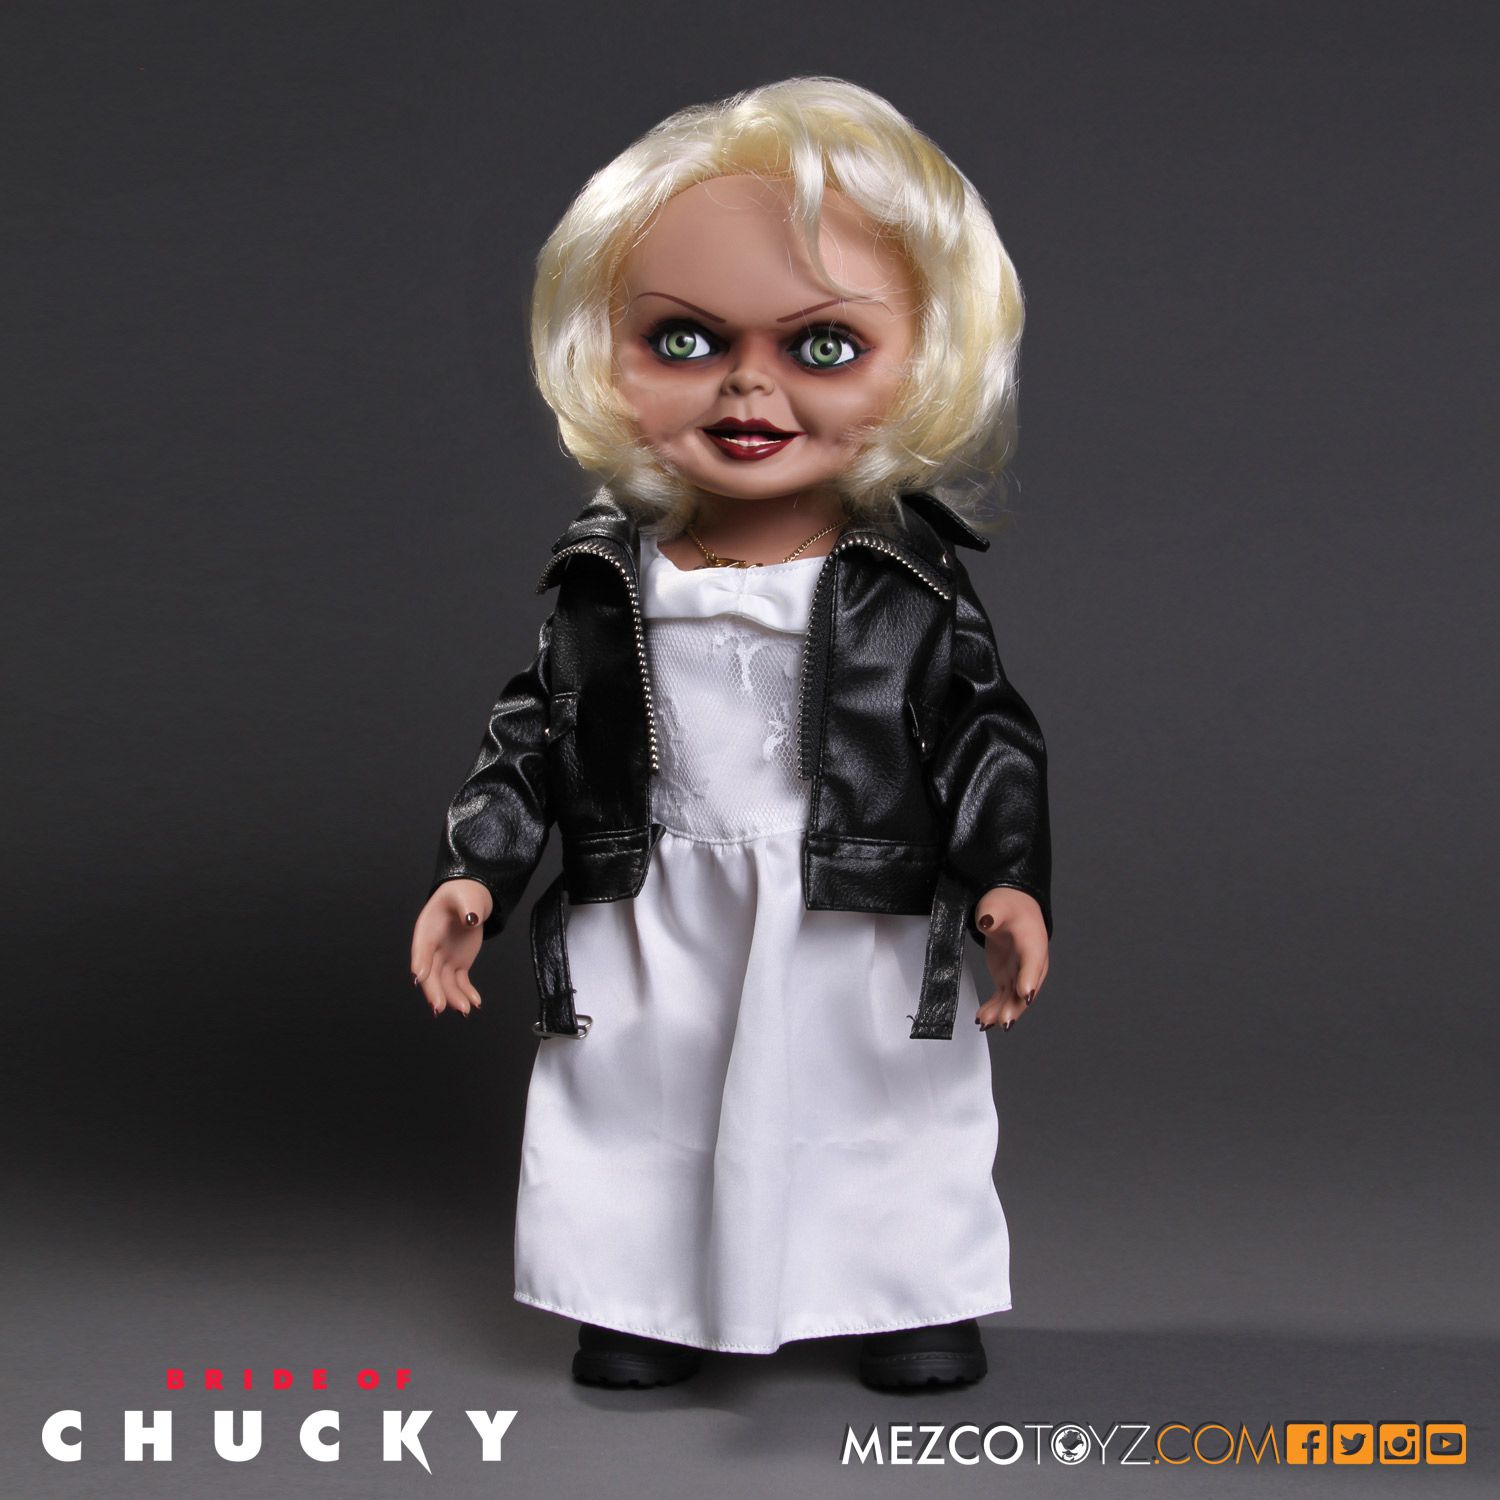 1500x1500 > Bride Of Chucky Wallpapers